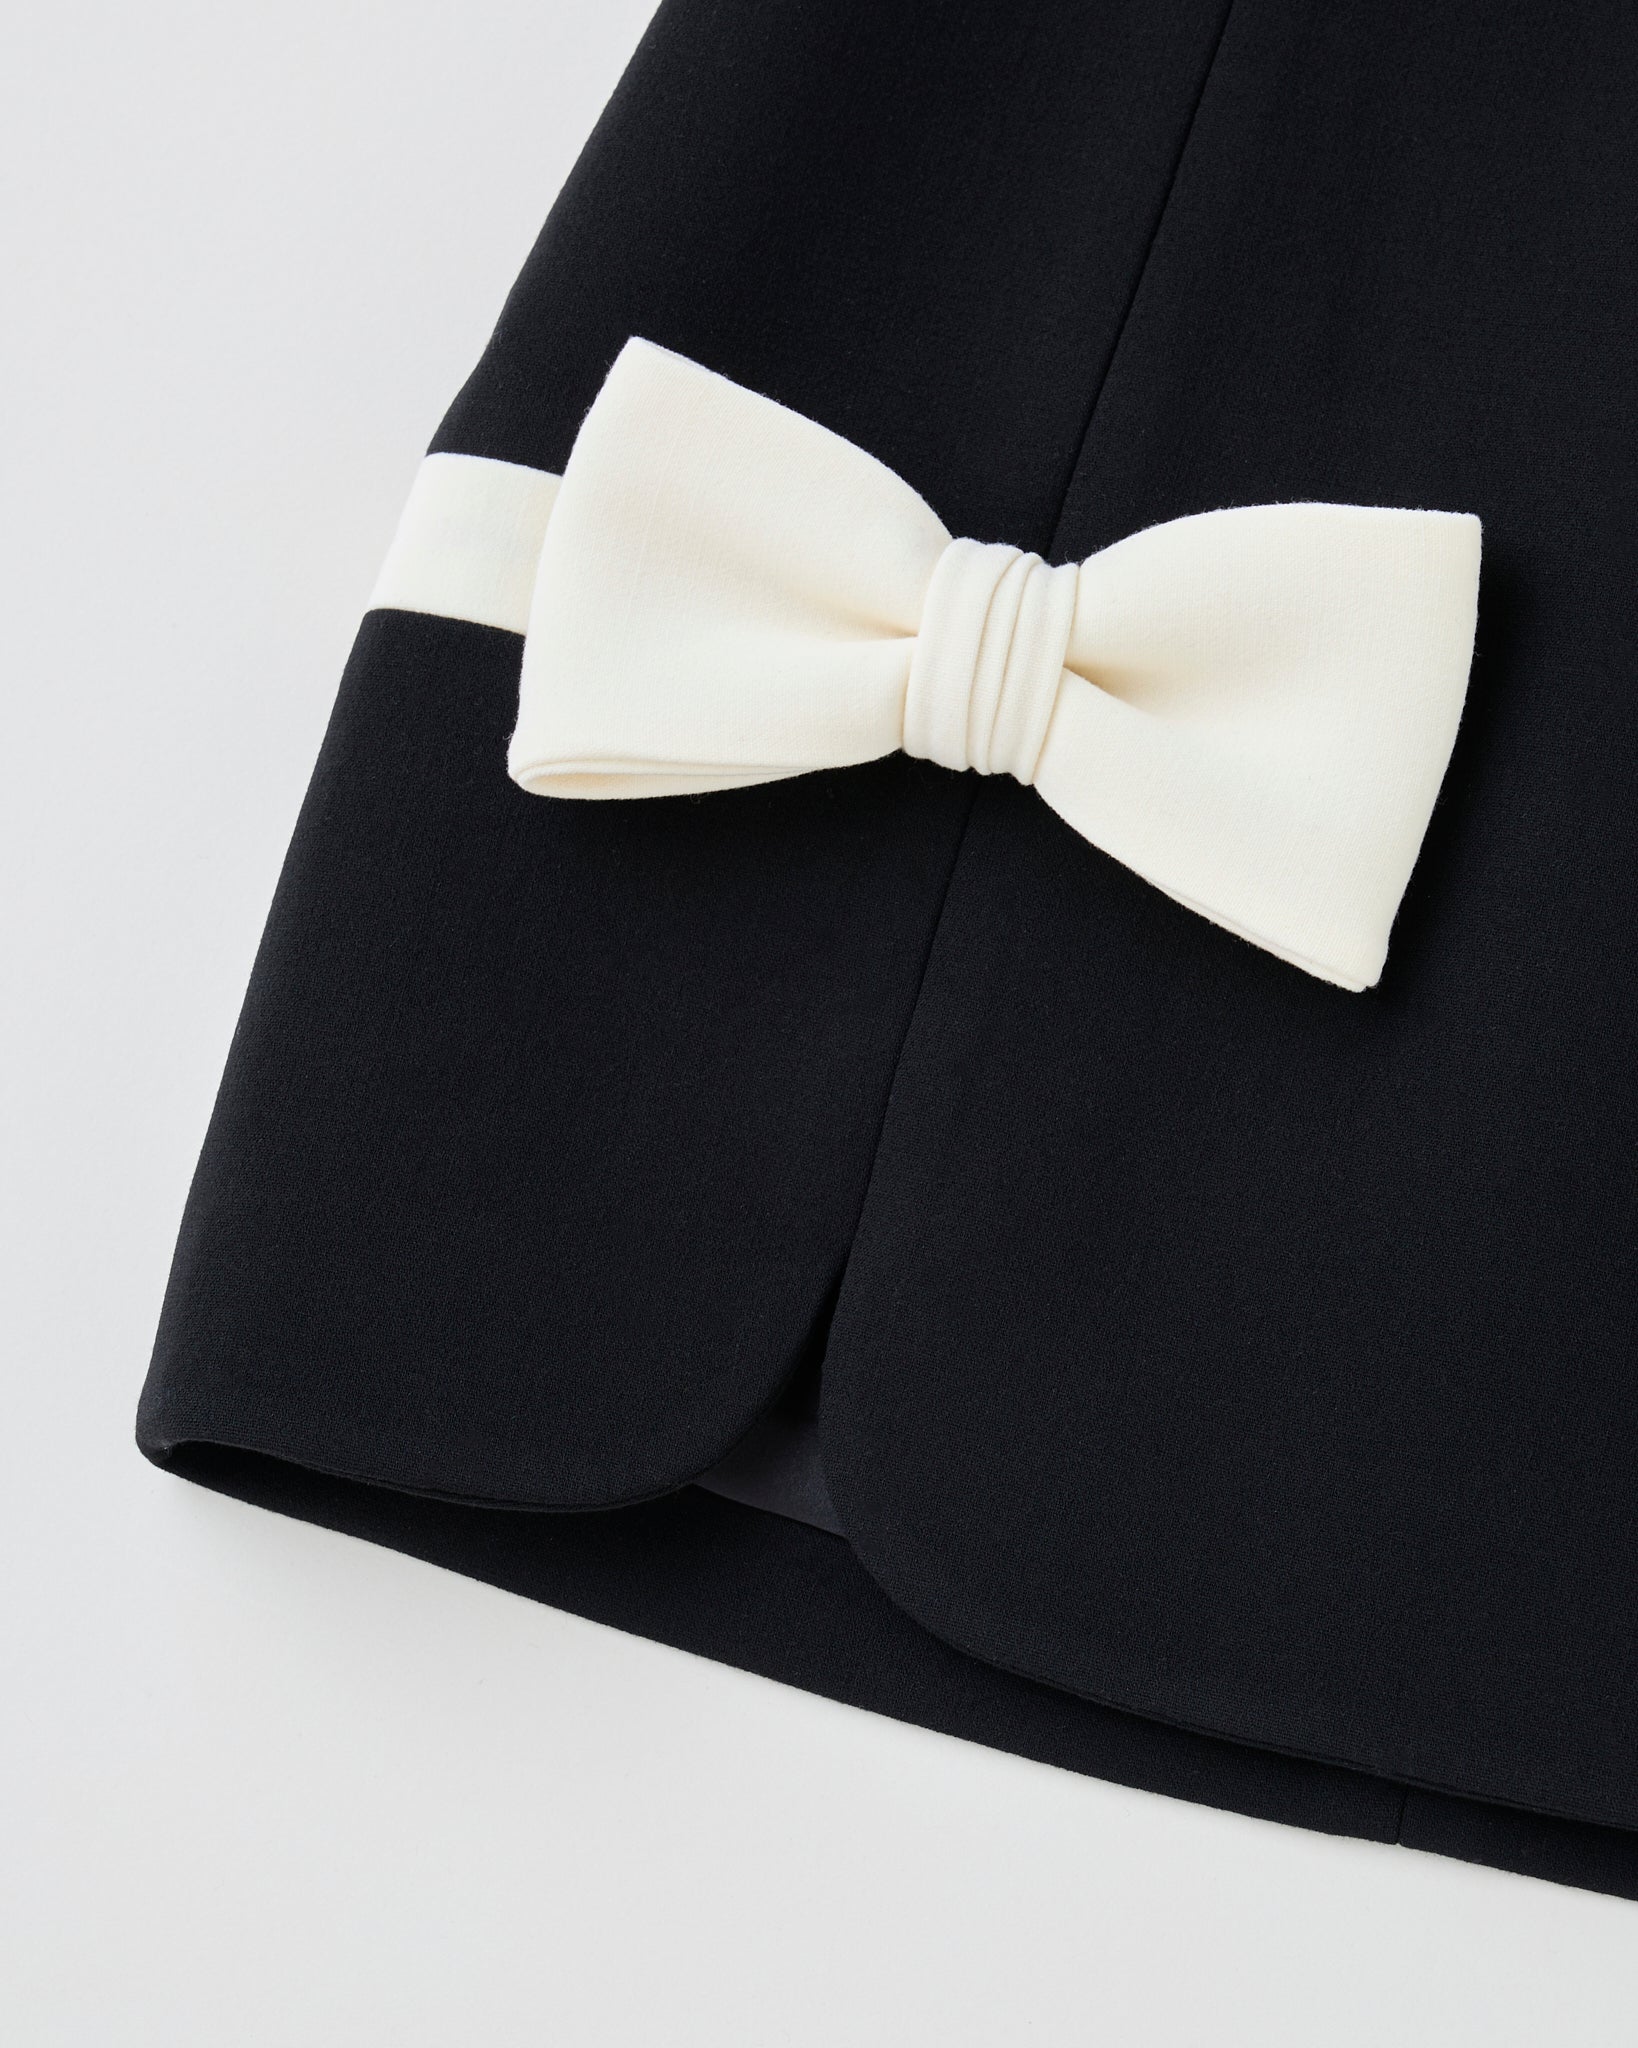 Paneled mini skirt with bicolor bows